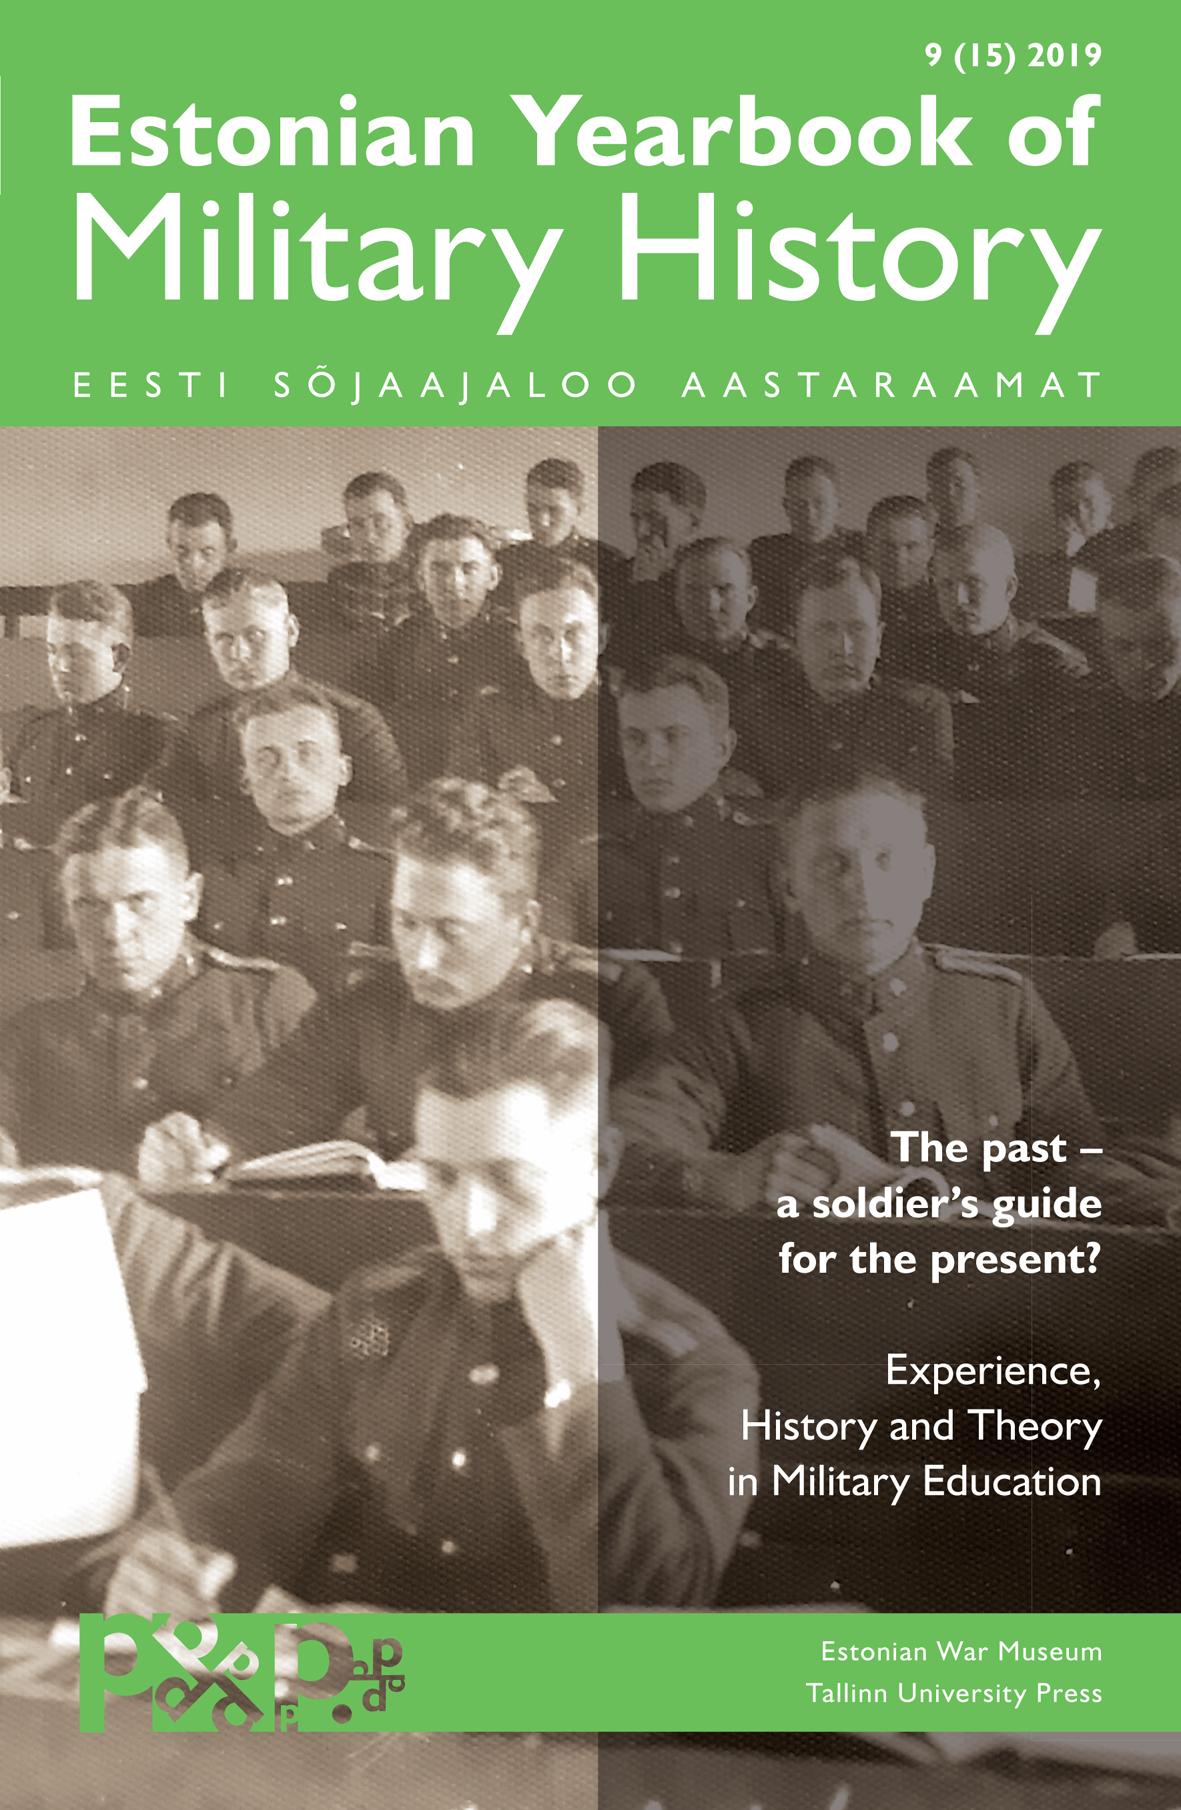 ESTONIAN YEARBOOK OF MILITARY HISTORY 9 (15) 2019